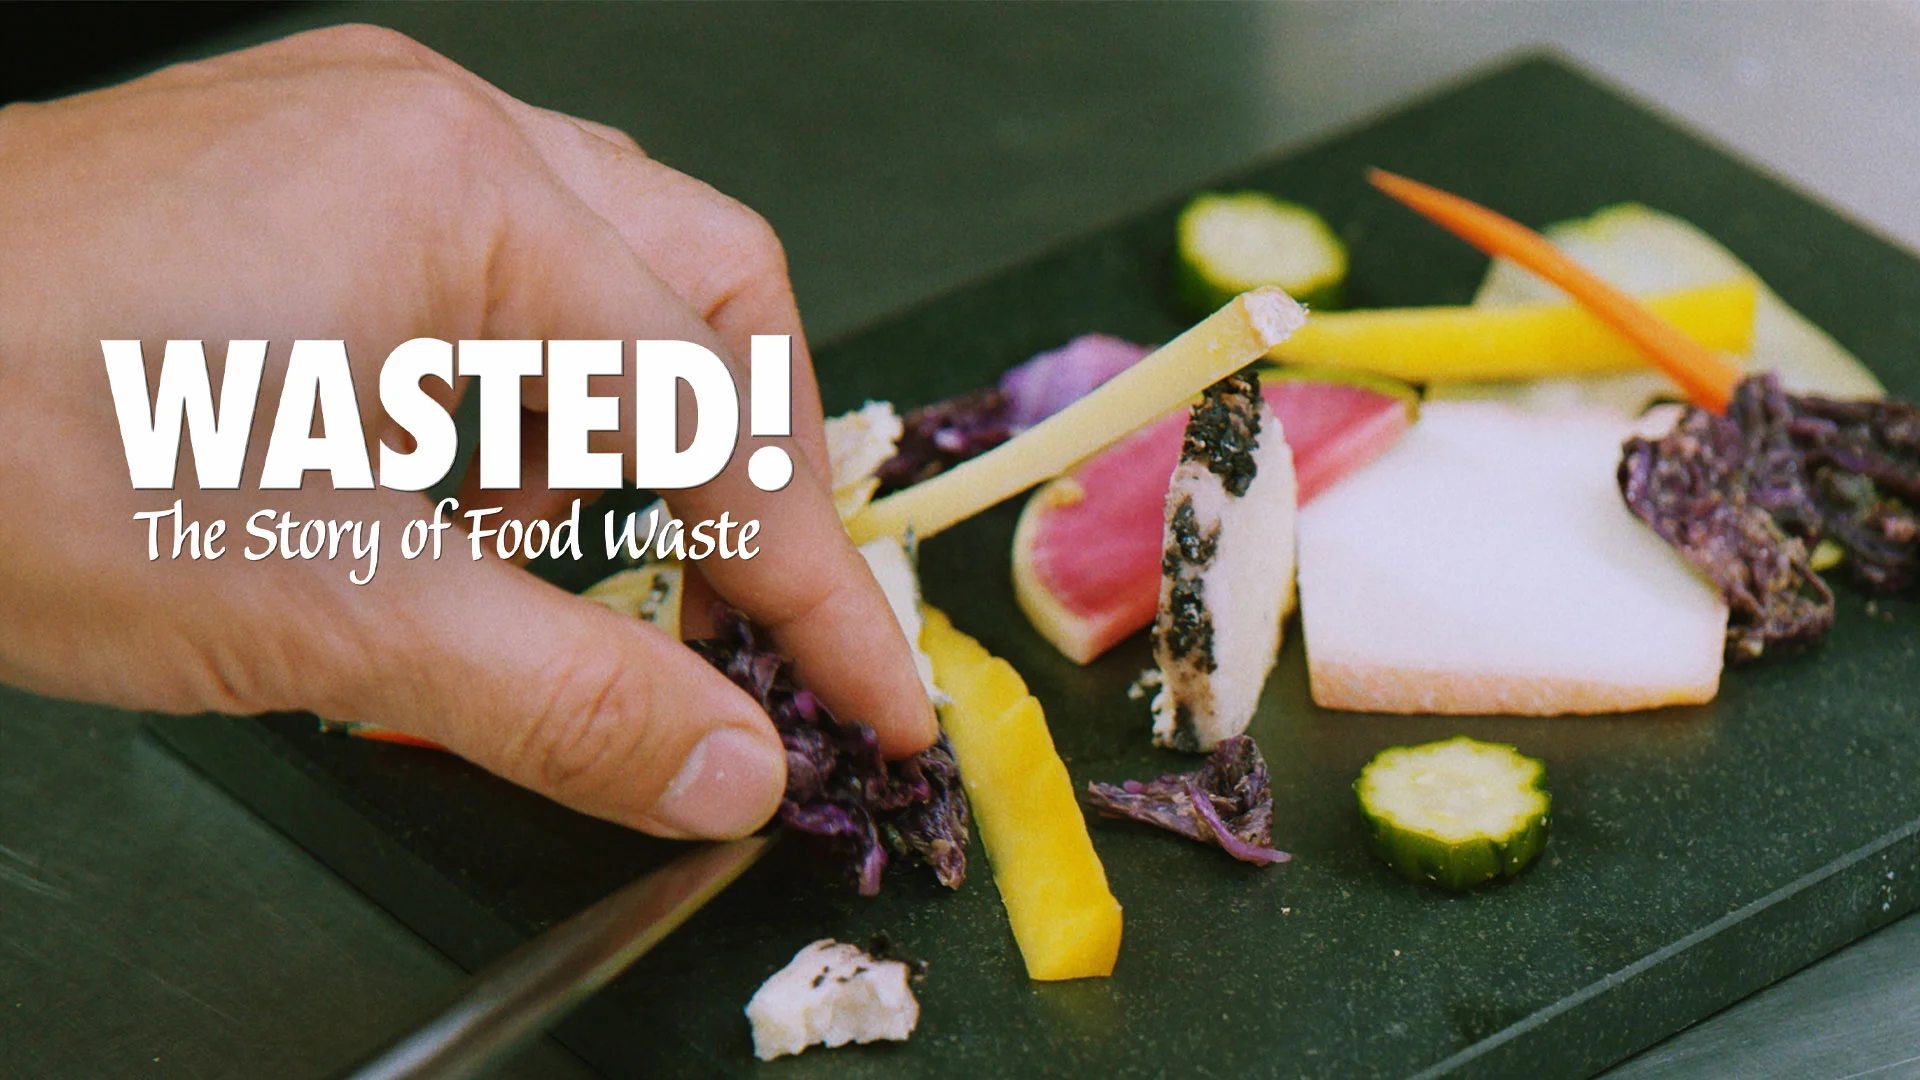 Wasted! - The Story of Food Waste